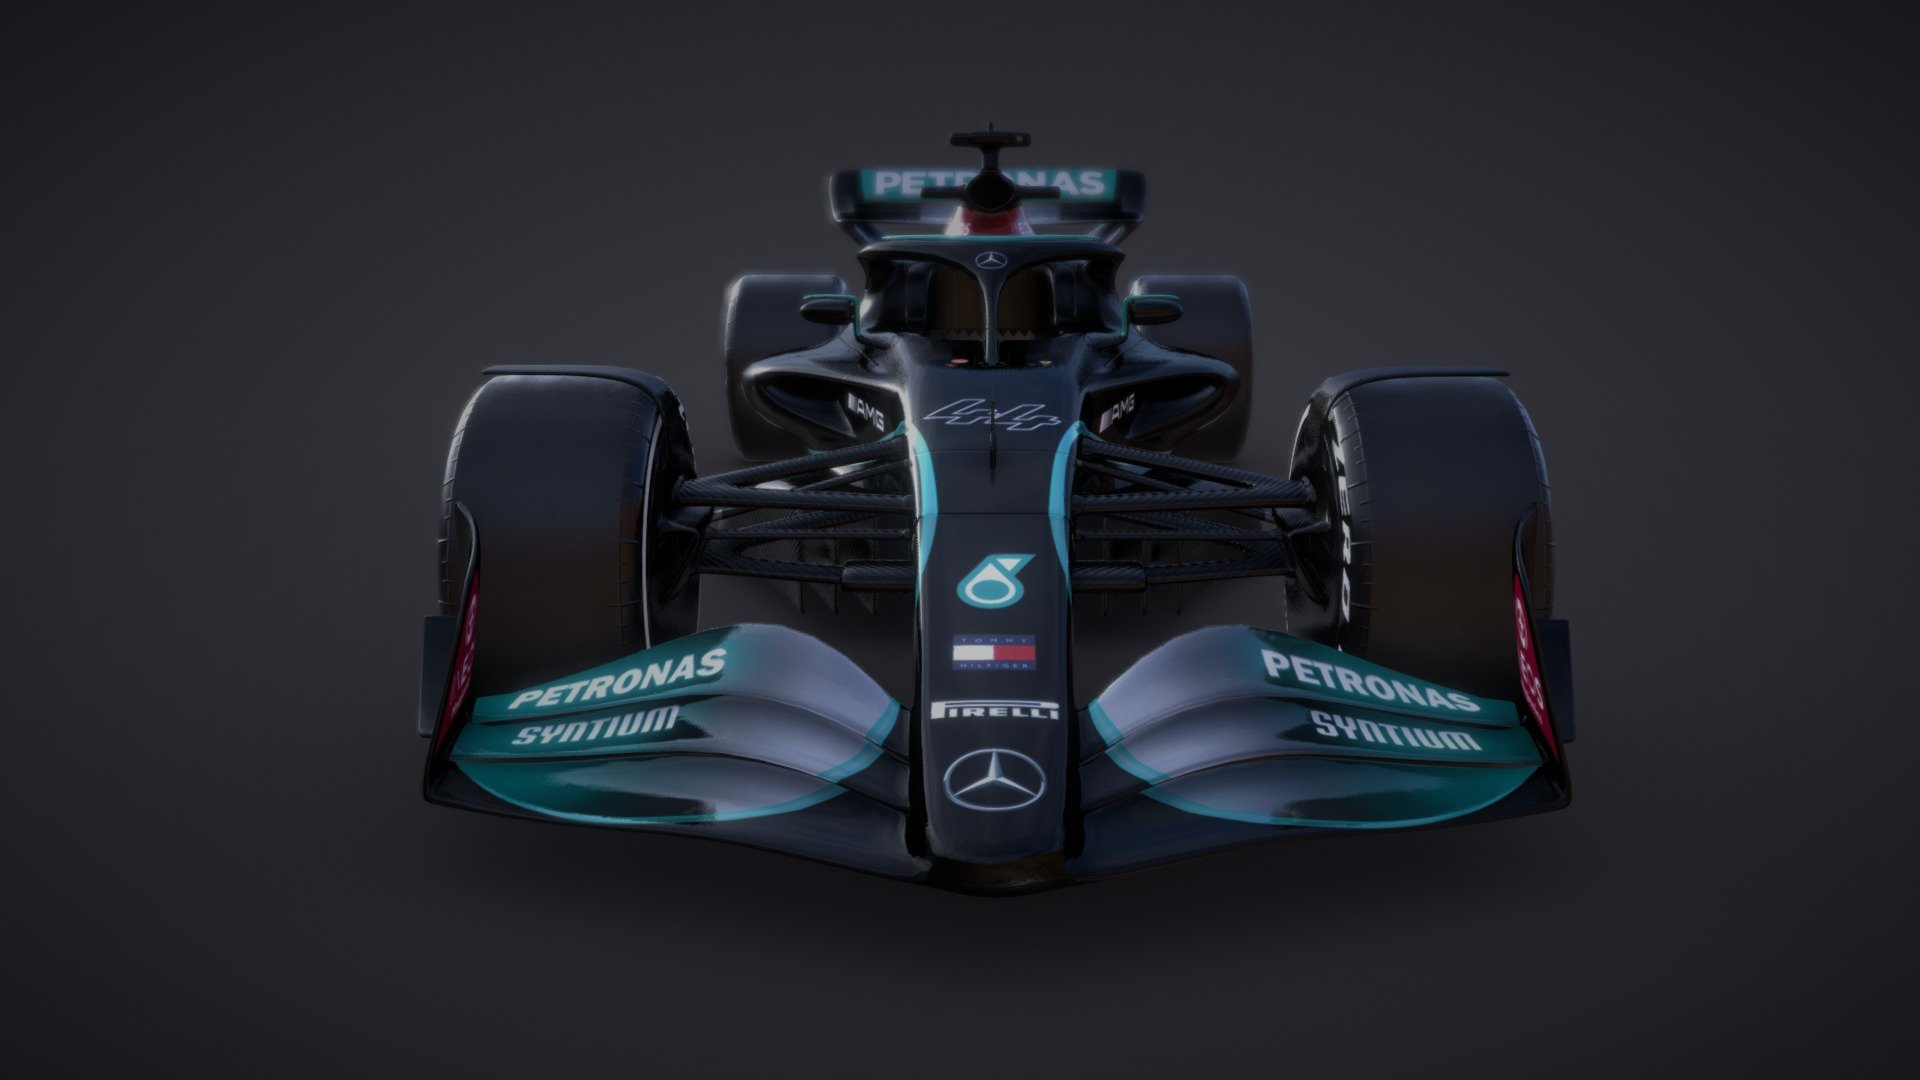 F1 Mercedes W13 concept design, based on Formula 1's upcoming 2022 regulations. In 2022 F1 will dramatically change the cars aerodynamically in order to allow drivers to get closer and race harder. The use of venturi tunnels along the floor of the car will see the return of the 1970's innovation known as ground effect, producing a huge amount downforce and reducing the need for complicated overbody aerodynamic surfaces which hinder the airflow for cars behind.

Optimised with less than 100k faces. High resolution 4k PBR textures, procedural carbon and metal materials. Includes textures for soft, medium and hard tyre compounds, also 3 F1 themed HDRIs and backplates created with Codemaster's F1 2020.

Example render (created with Blender, source file included):
 - F1 Mercedes W13 Concept - Buy Royalty Free 3D model by Nick Broad (@nickbroad) 3d model